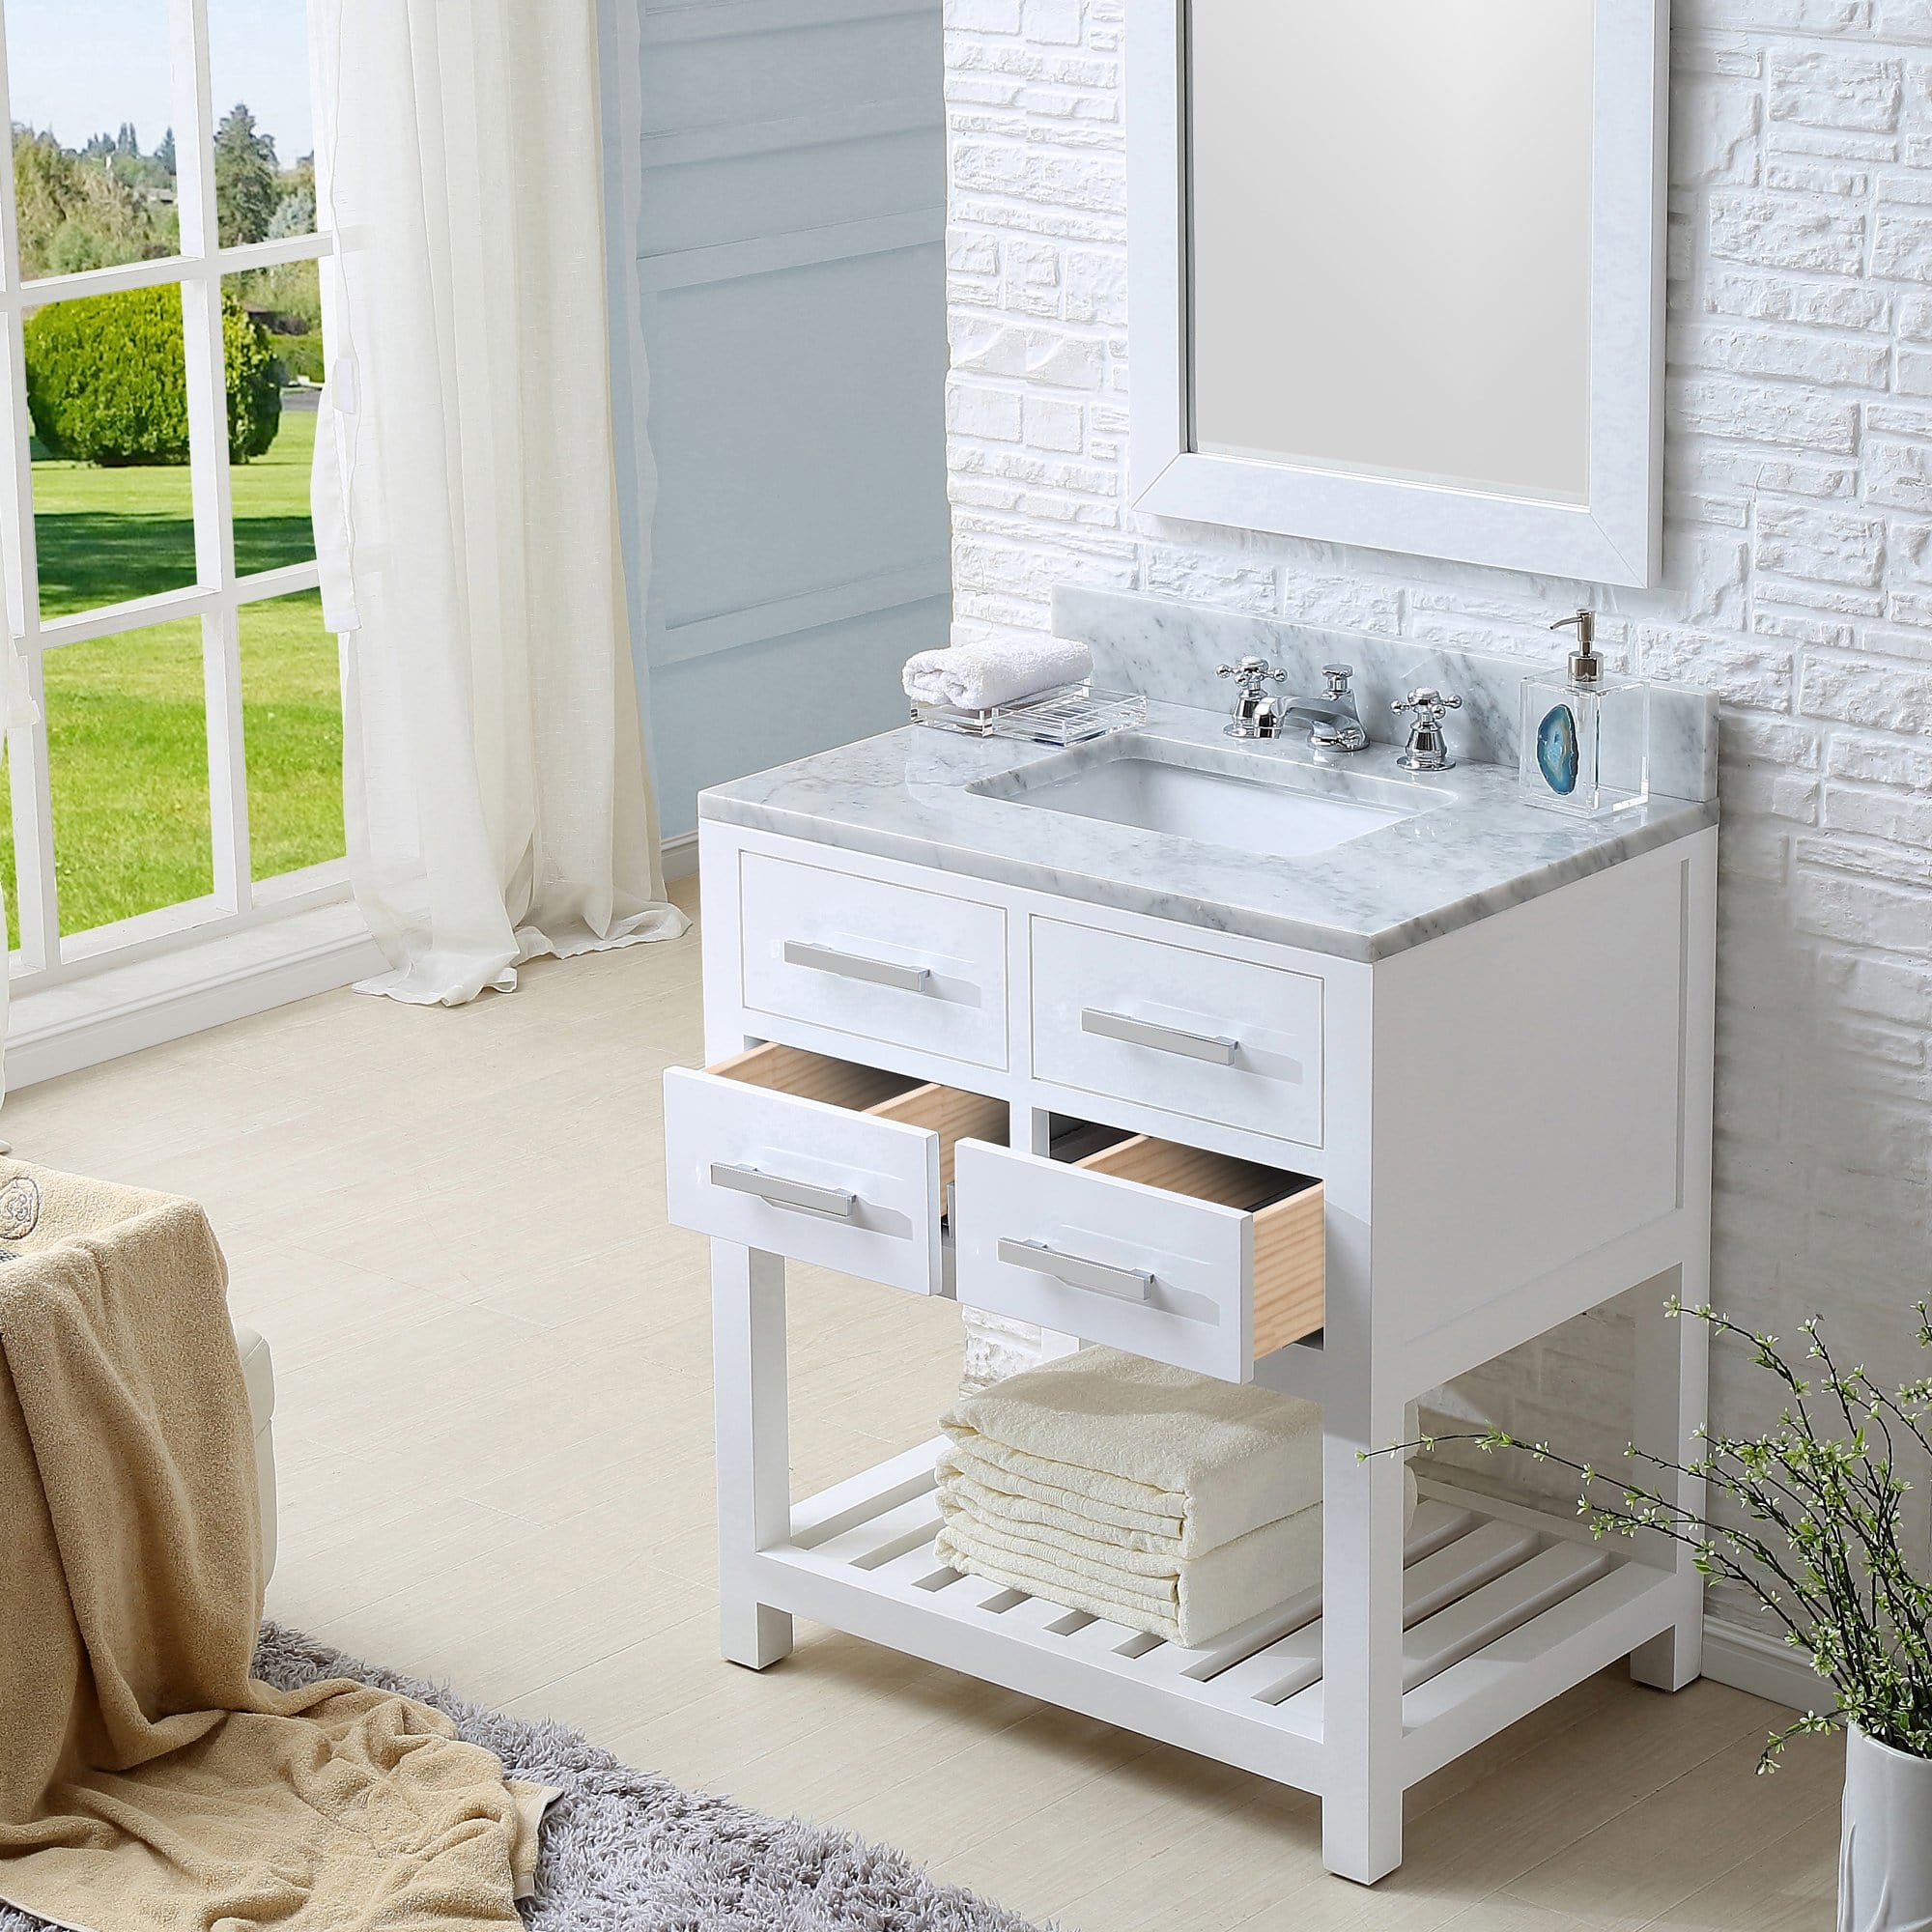 Water Creation 30 Inch Pure White Single Sink Bathroom Vanity With Matching Framed Mirror And Faucet From The Madalyn Collection - Molaix700621683582Bathroom vanityMA30CW01PW-R24BX0901